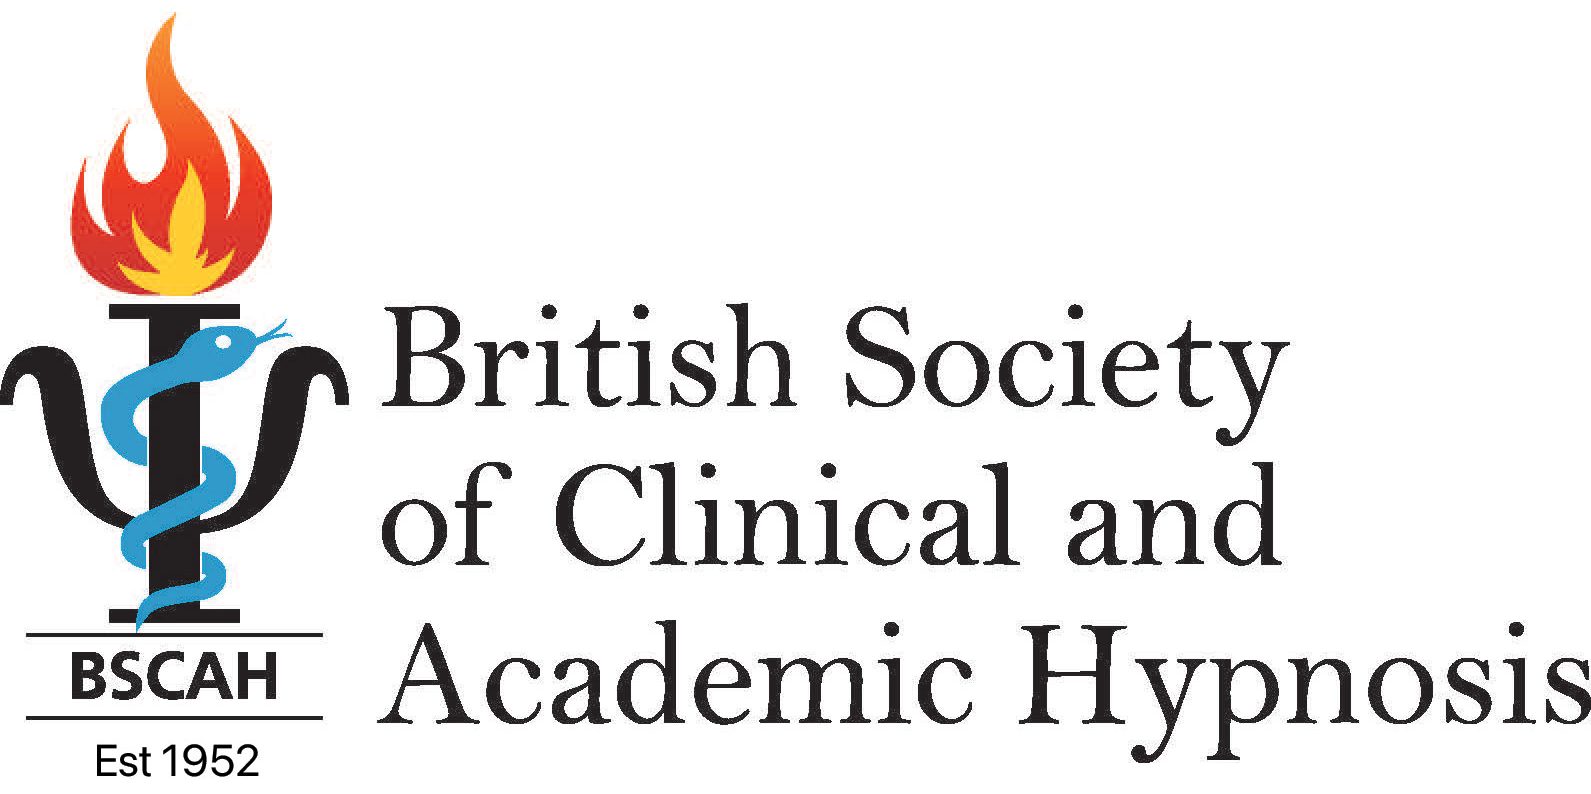 BSCAH Member of The British Society of Clinical and Academic Hypnosis